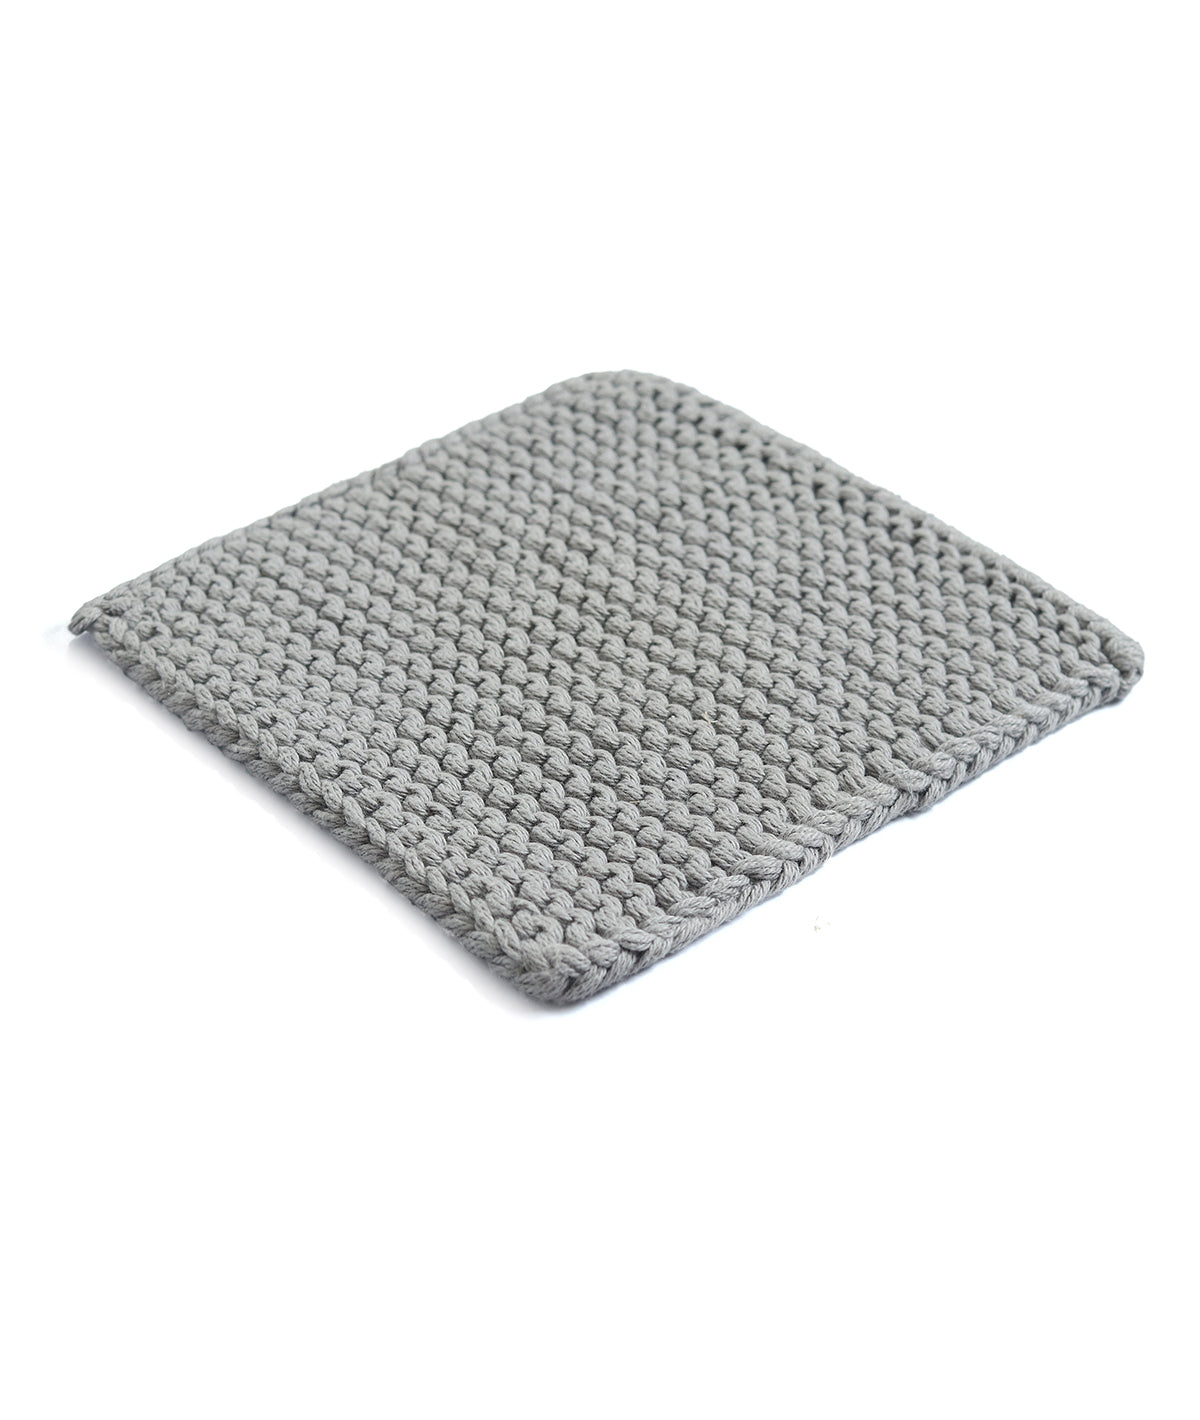 Pot holder - Cotton Knitted Pot placement mat /Pot Holder/Pot Coaster in Grey Color (Multi Purpose) Set of 2